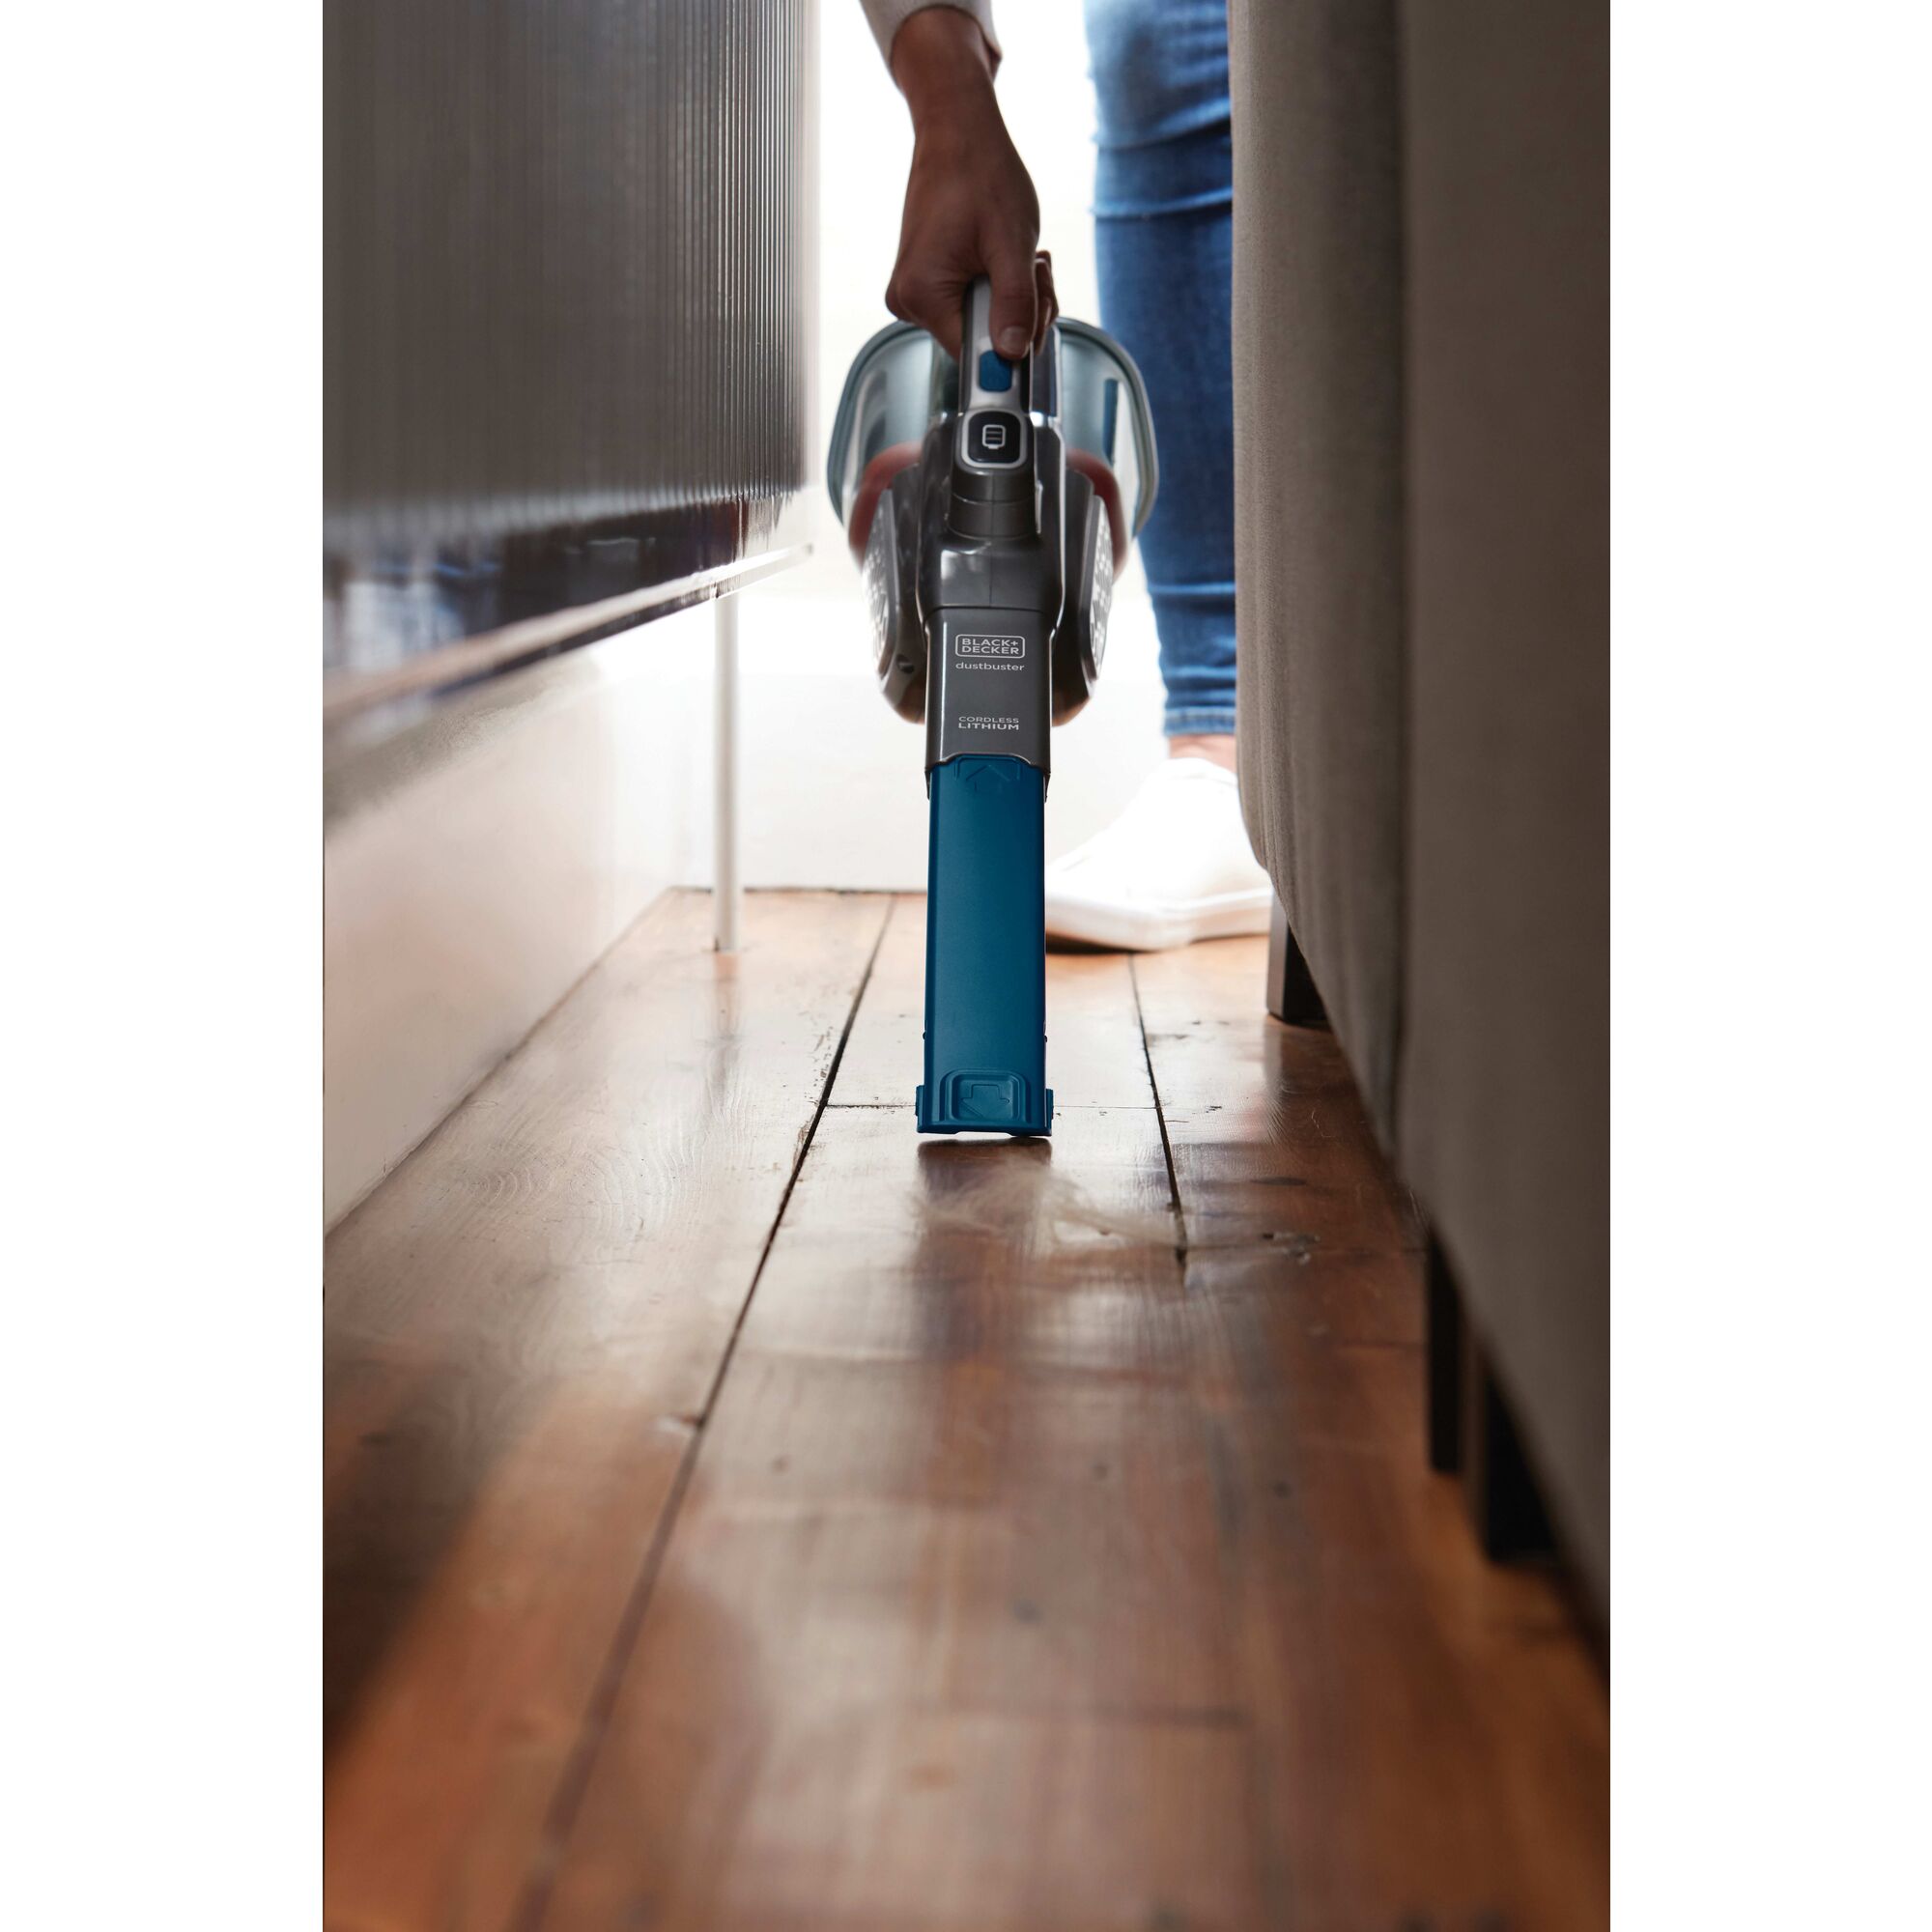 12 volt dustbuster advanced clean cordless hand vacuum being used .